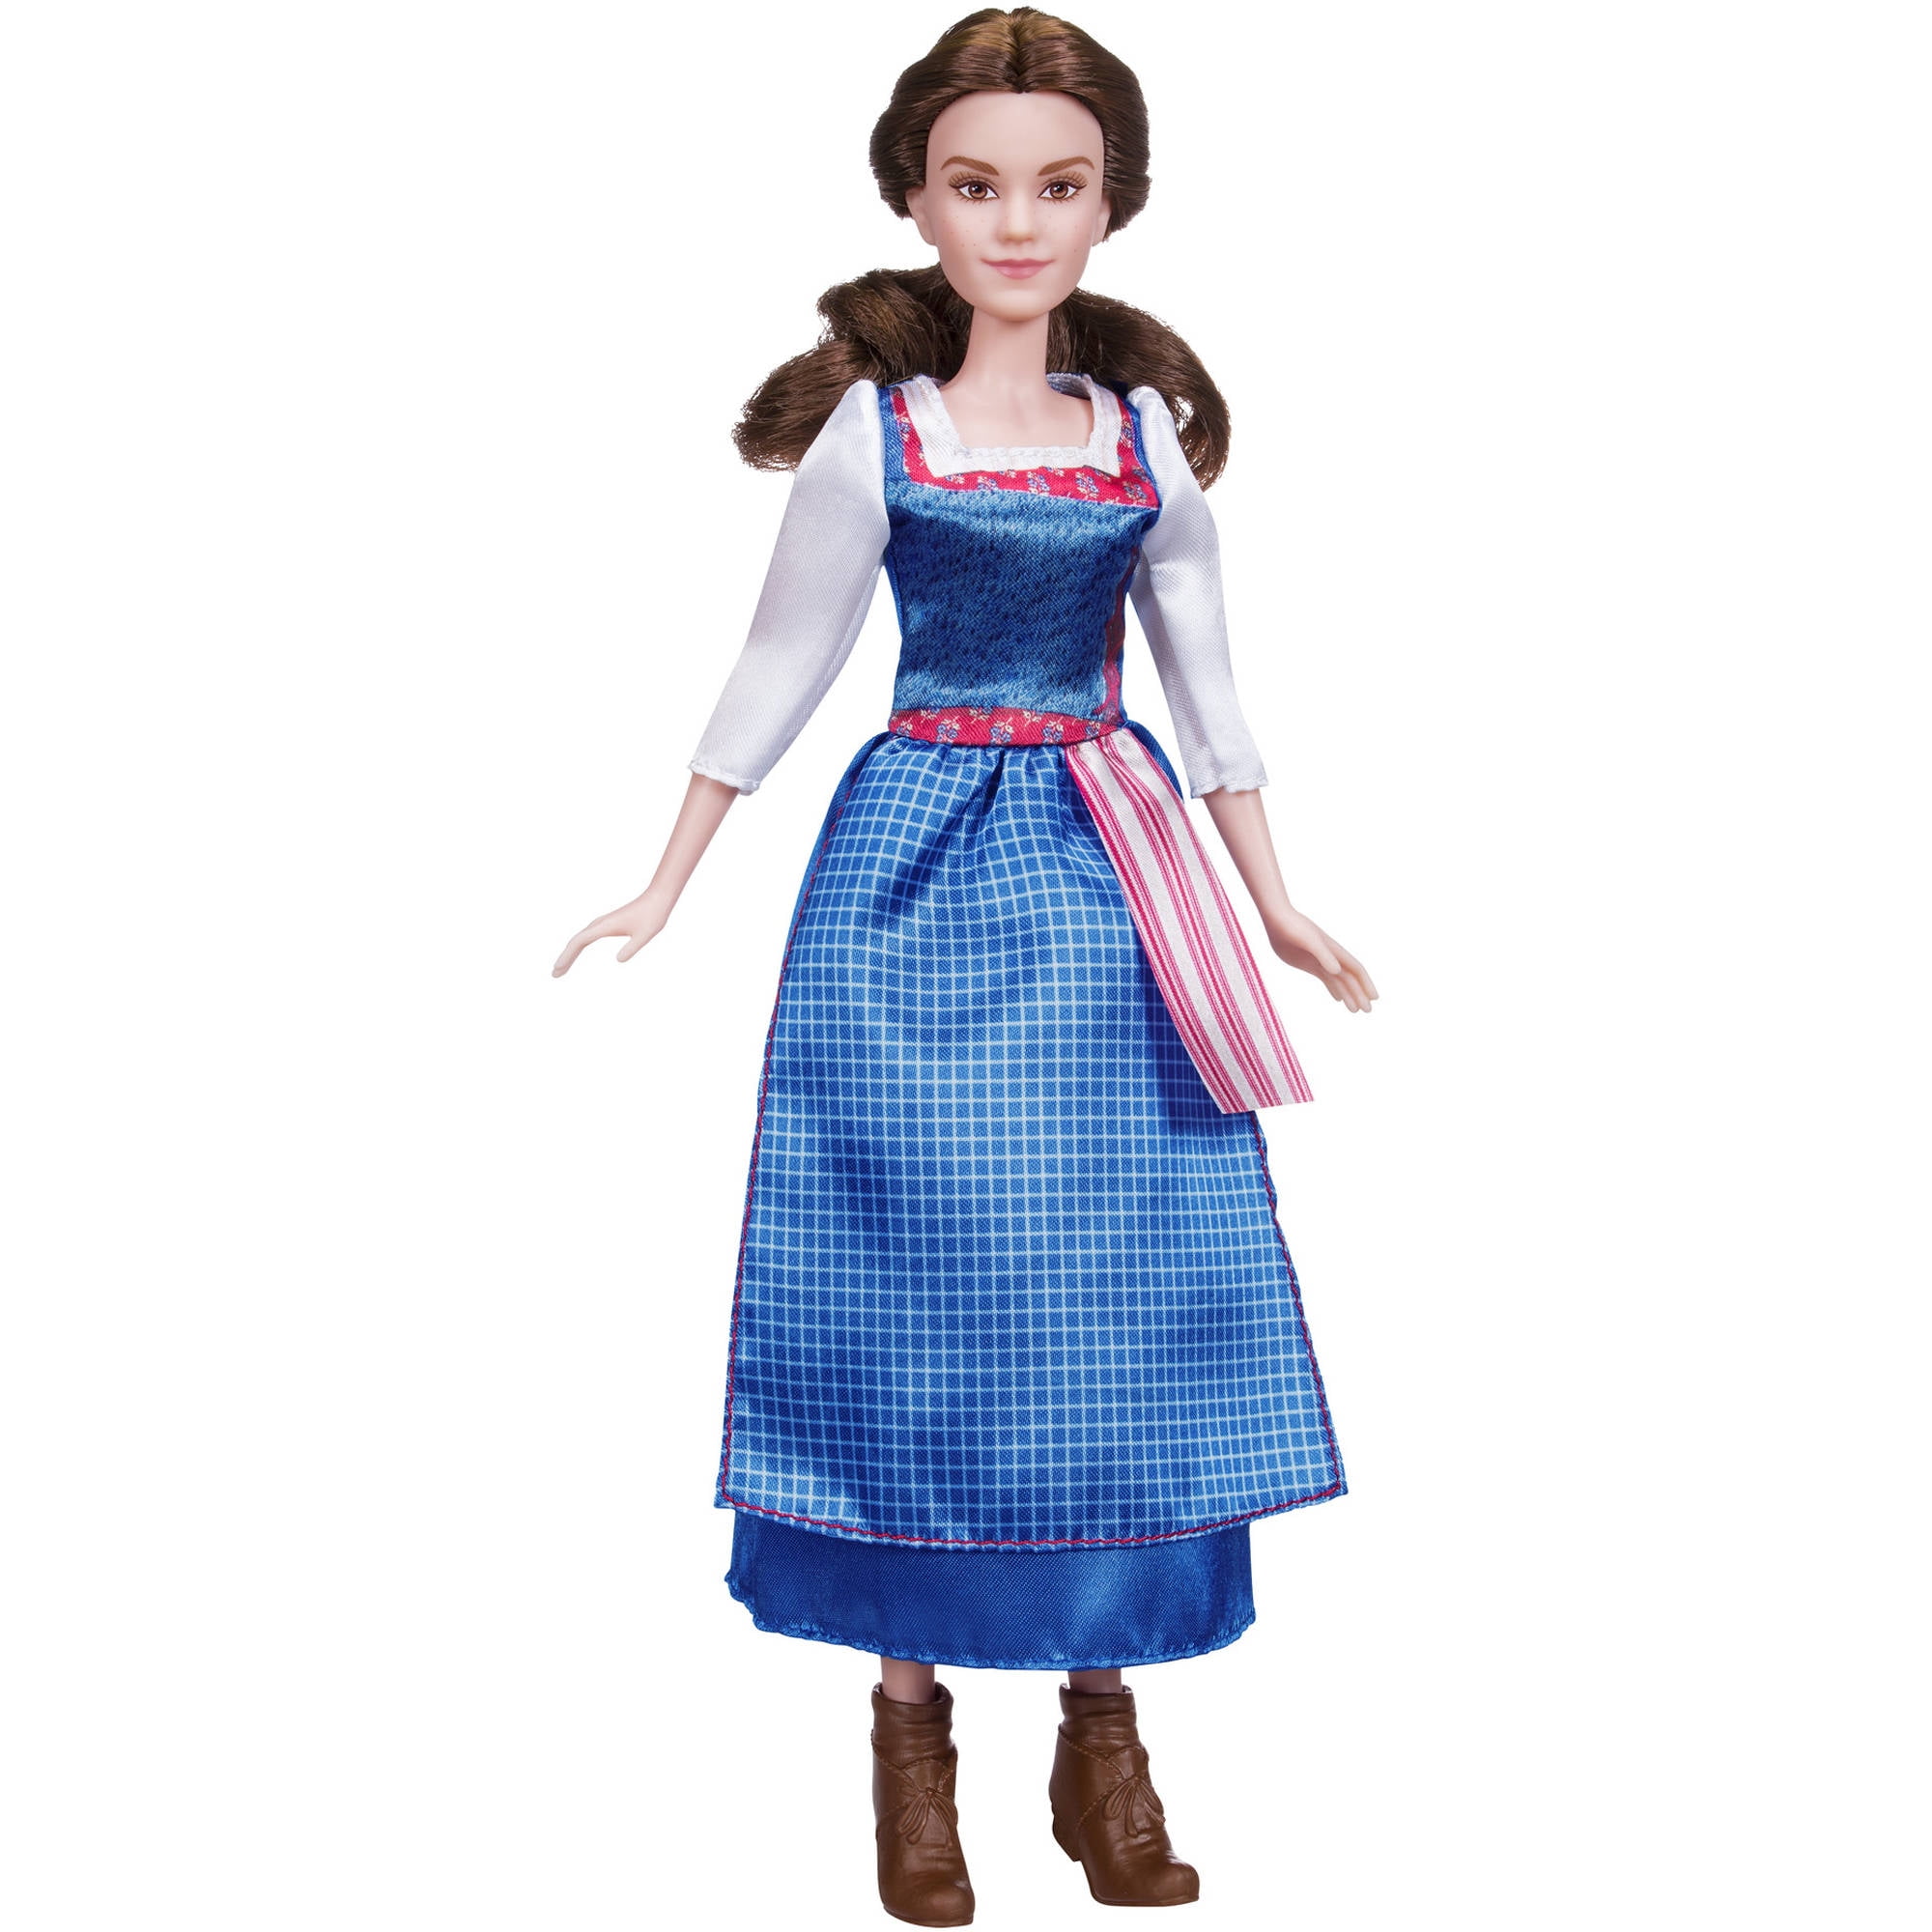 Disney Store Beauty and the Beast Live Action Film Belle Doll New with Box GIFT 